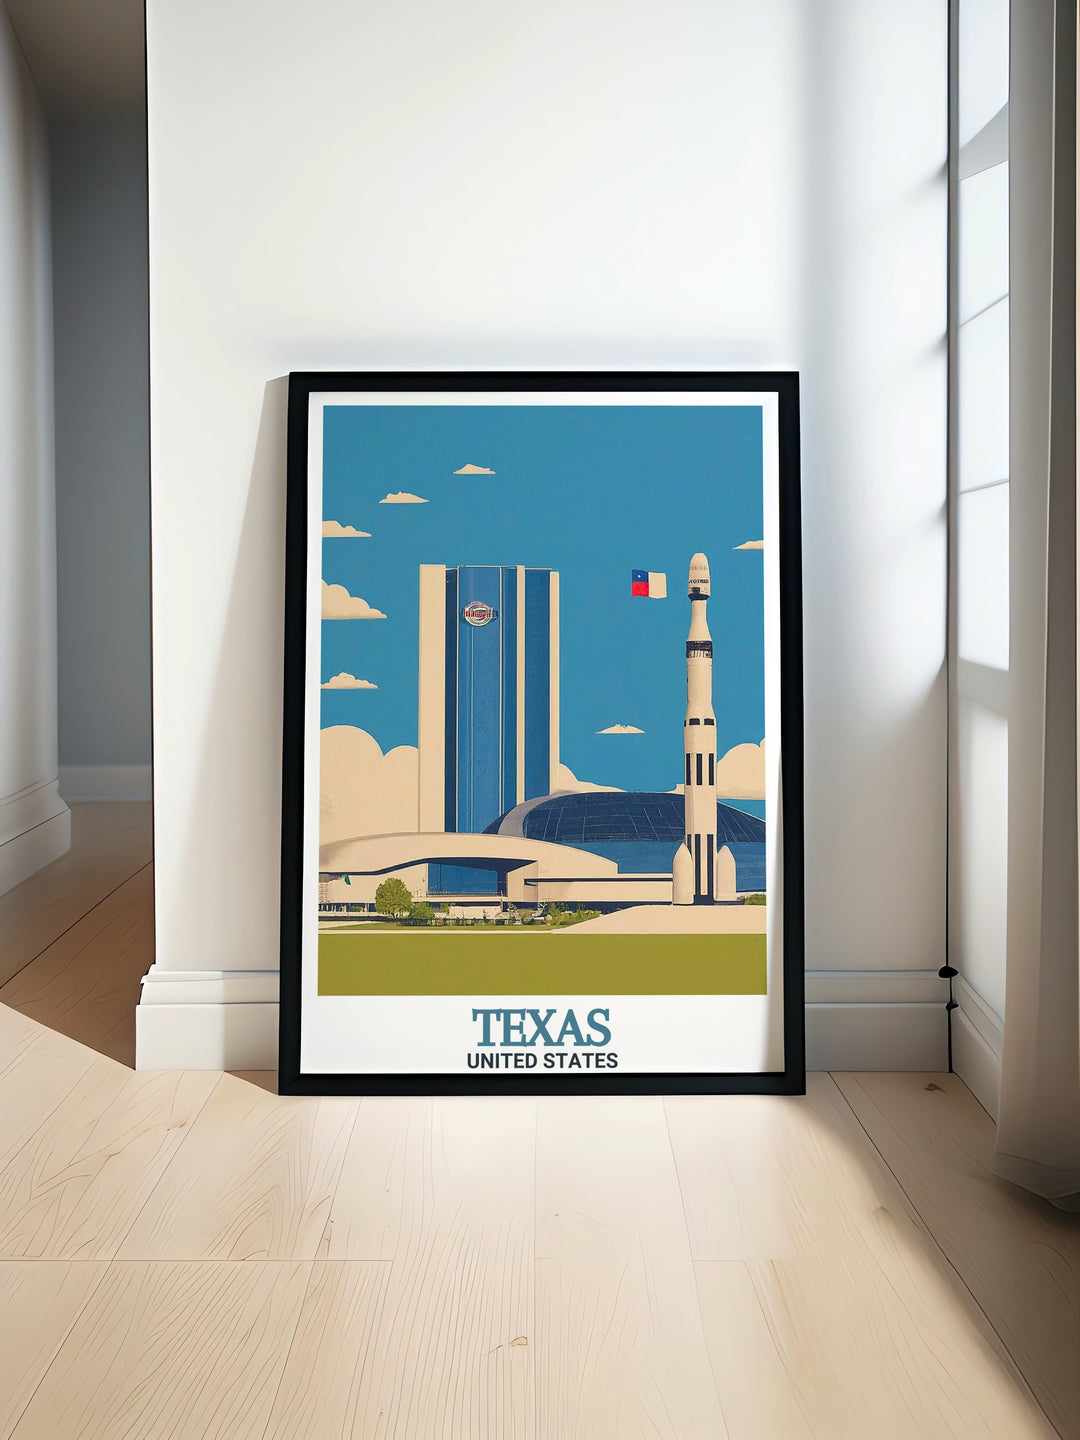 Guadalupe Mountains National Park Poster featuring El Capitan and Guadalupe Peak Texas. Perfect for your home decor. This vibrant print showcases the natural beauty of Guadalupe Texas USA and includes stunning details from Space Center Houston.